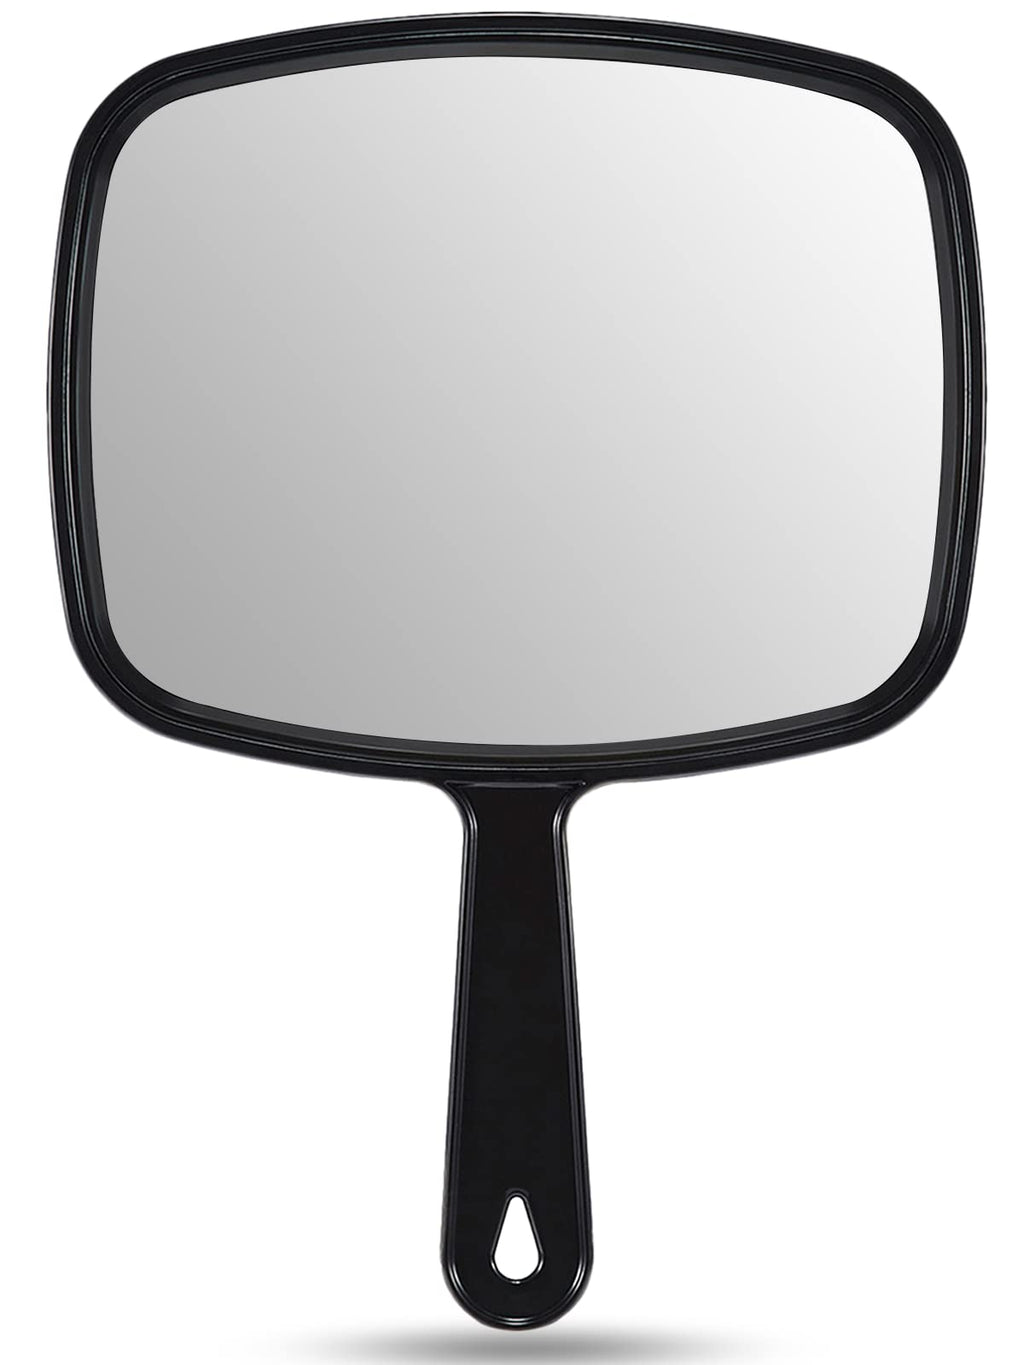 [Australia] - OMIRO Hand Mirror, All Black Handheld Mirror with Handle, 6.6" W x 9.3" L 1 Count (Pack of 1) 